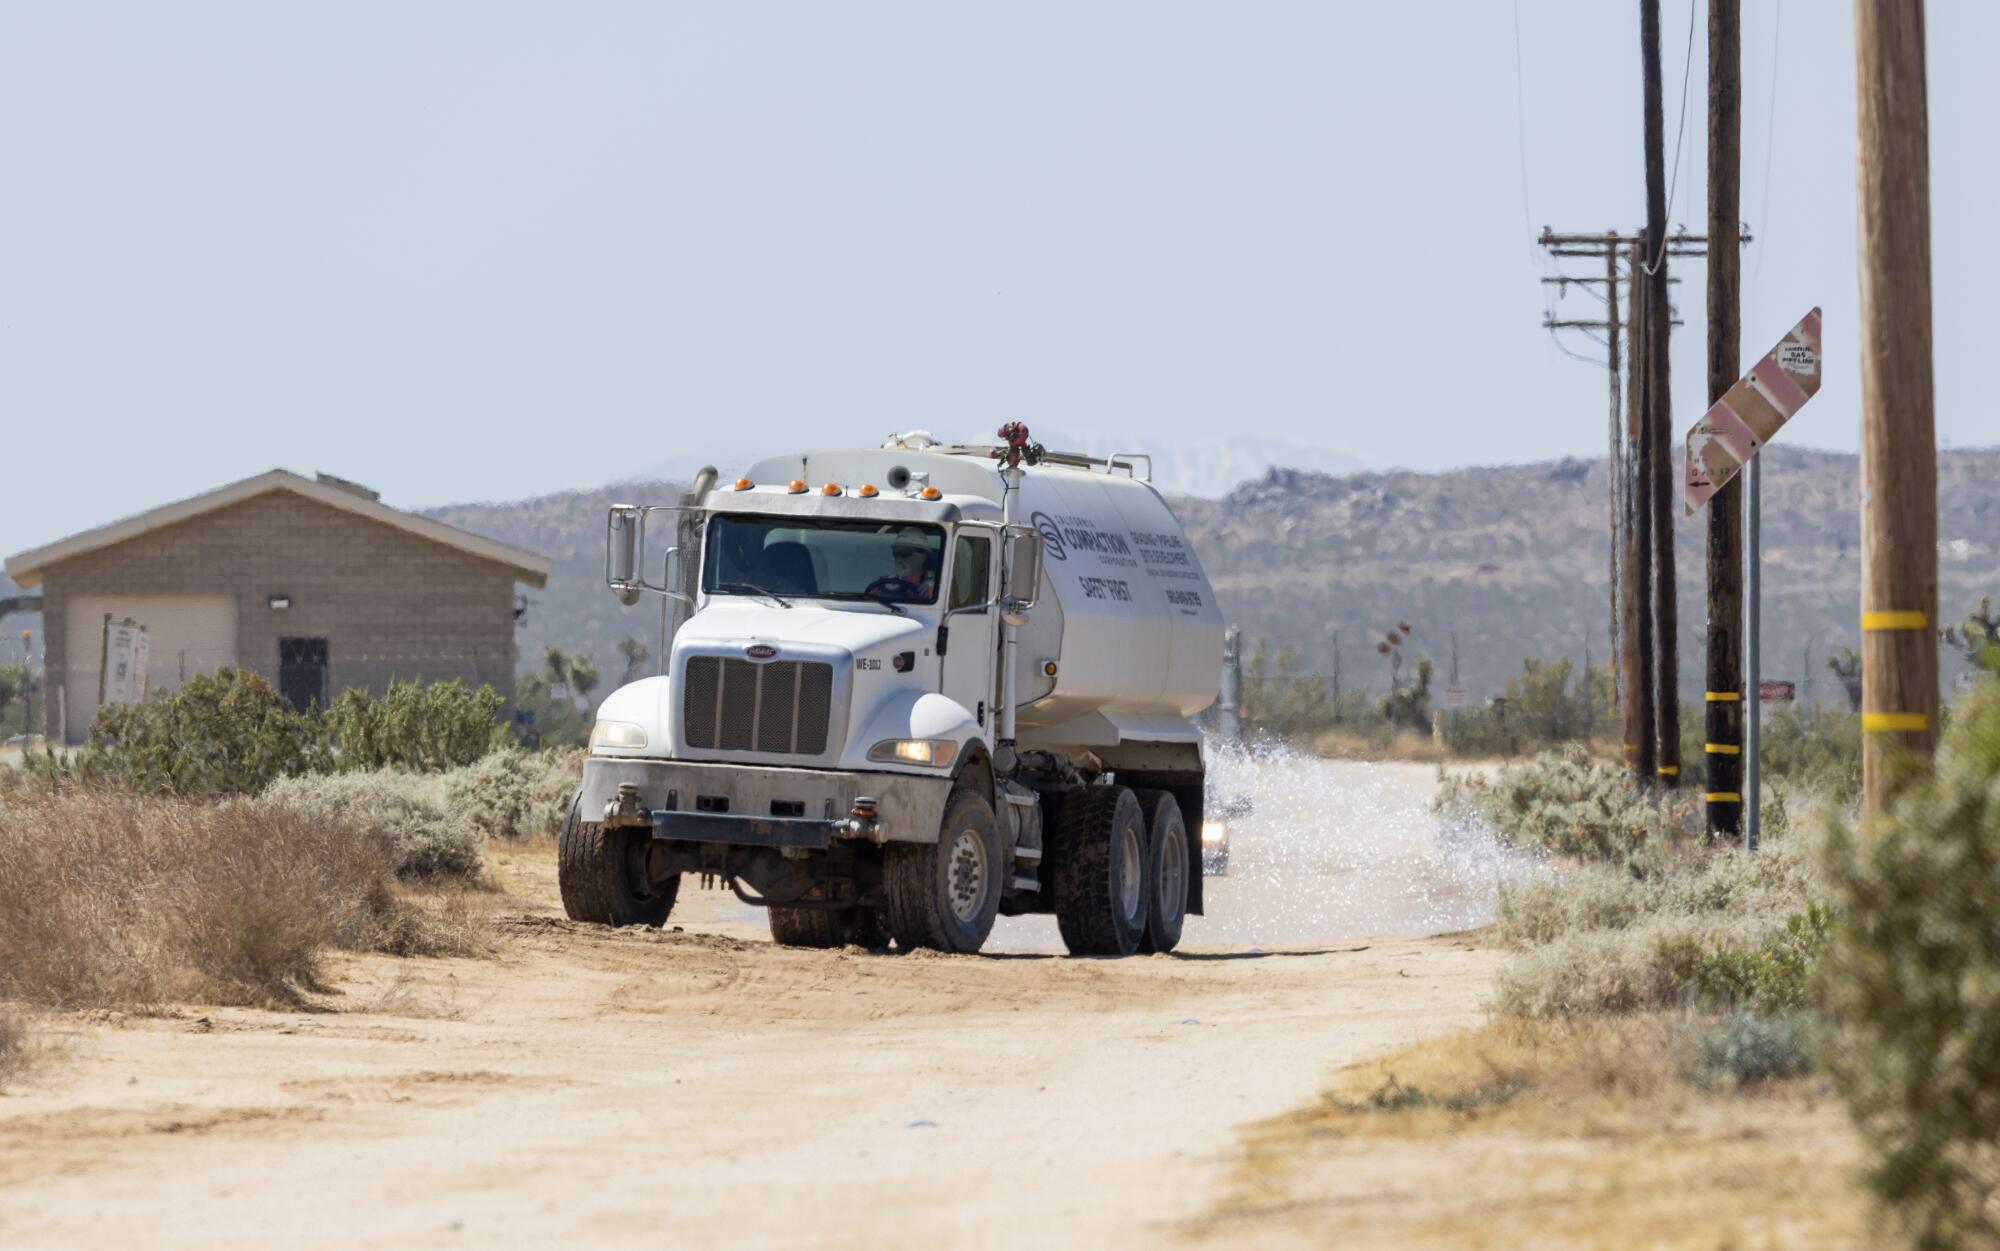 A tanker truck spreads water on a dirt road in the desert.